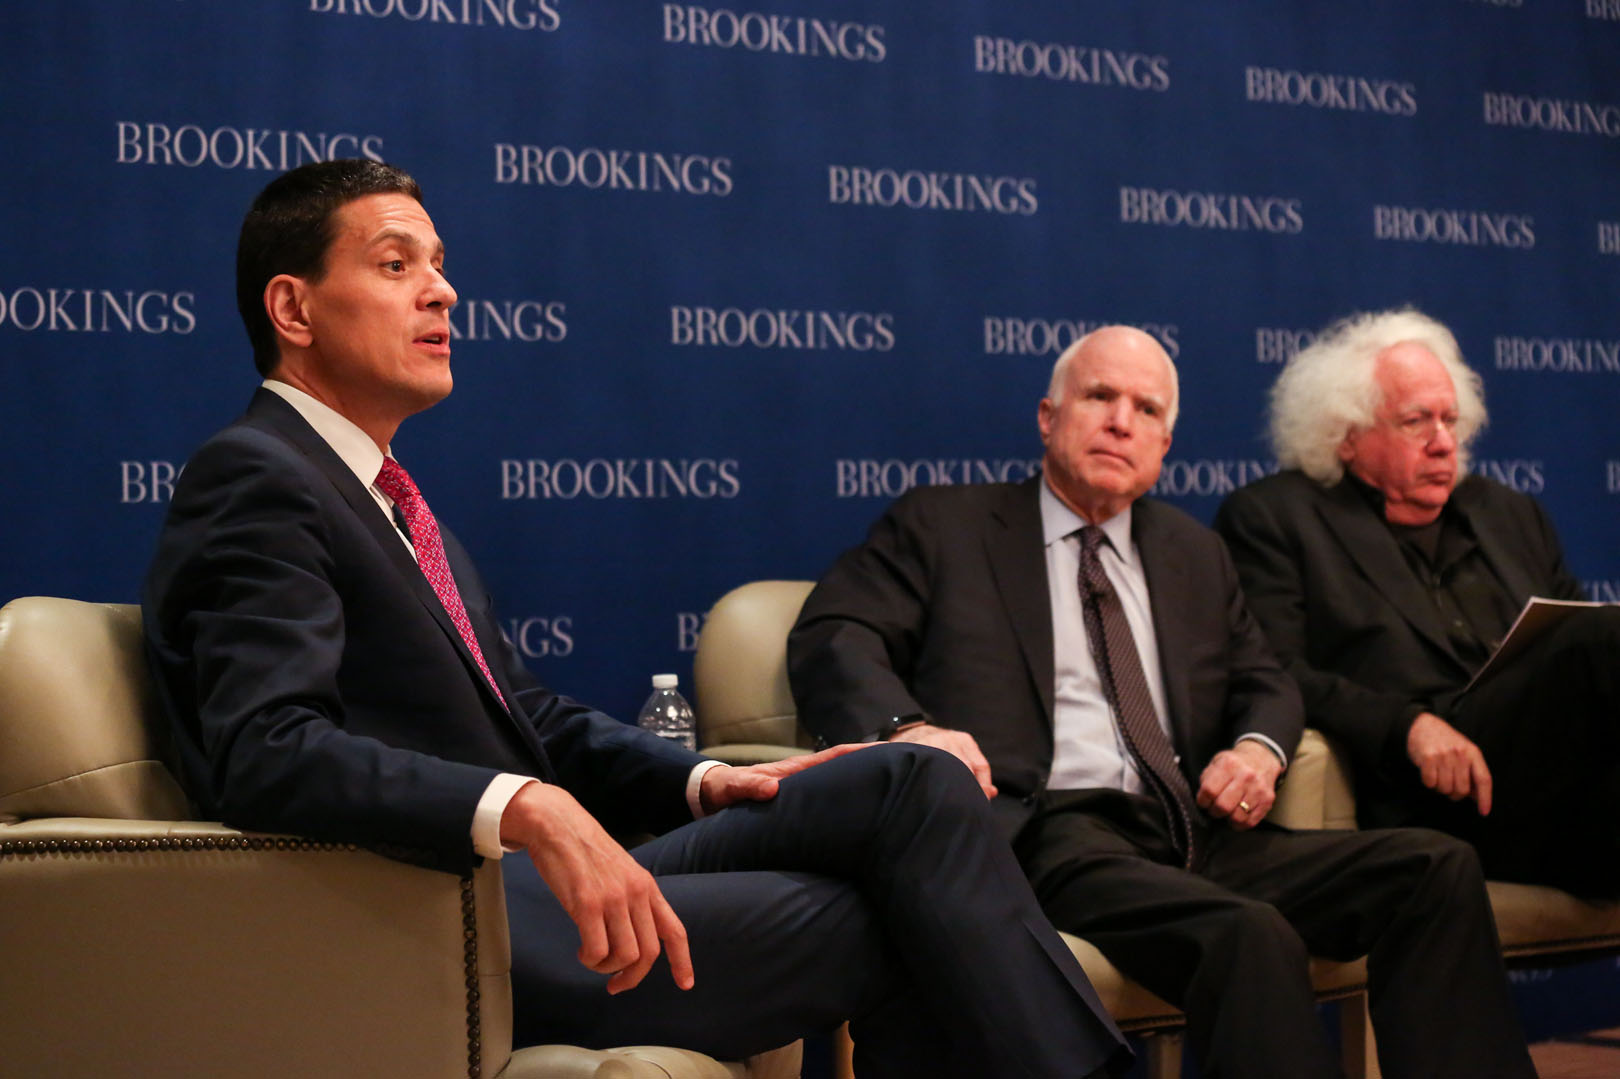 Milliband, McCain, and Wieseltier